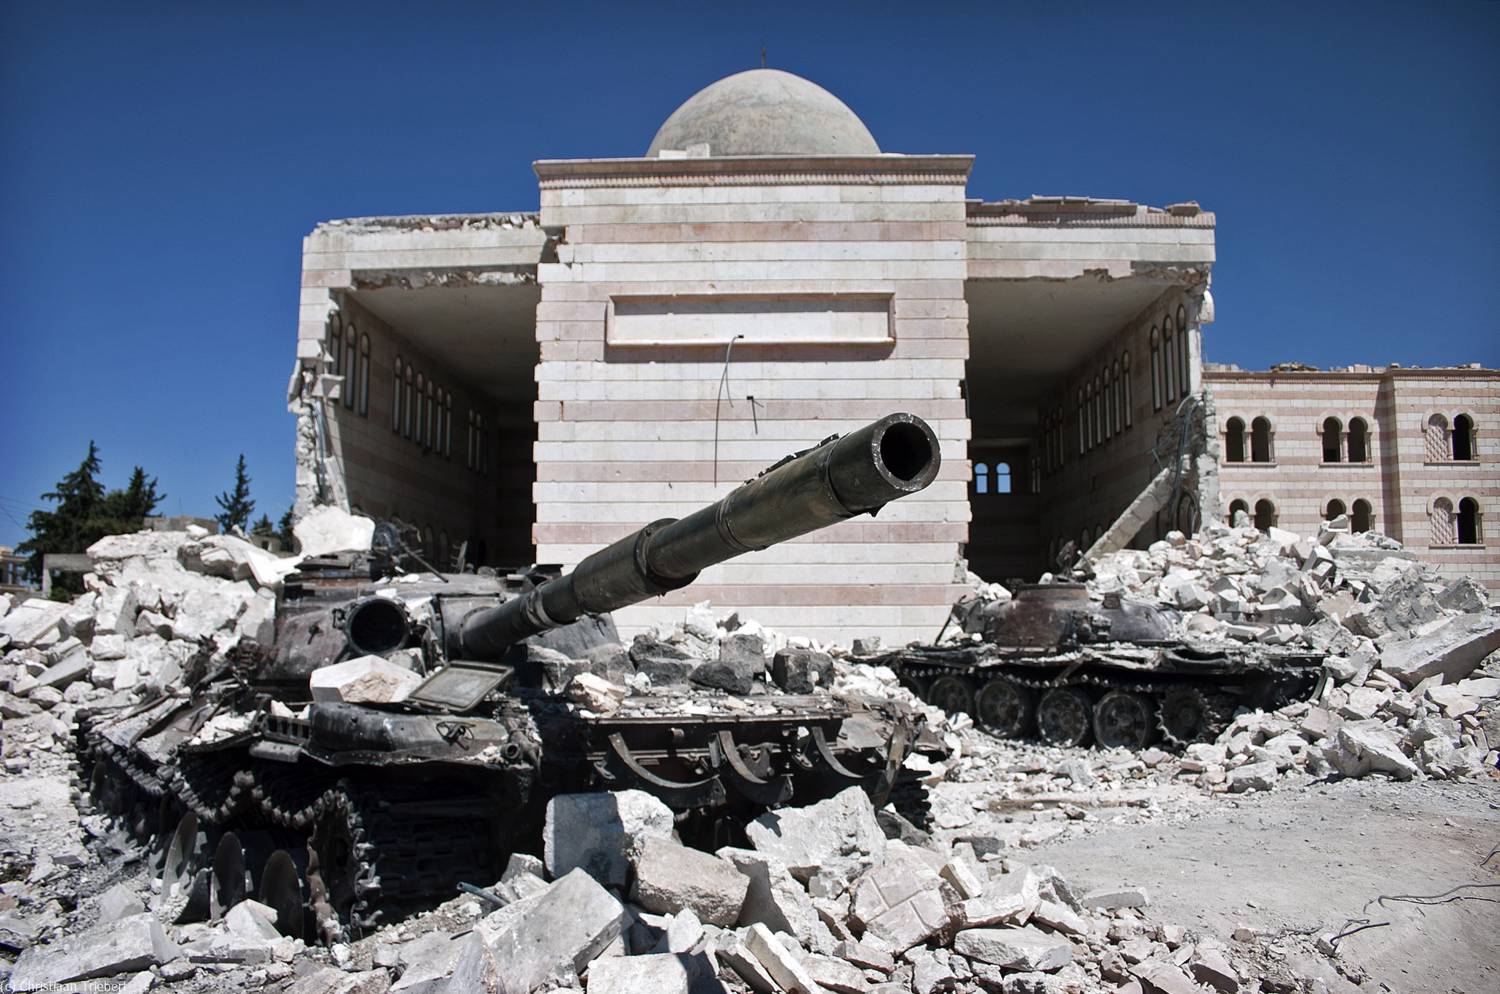 Destroyed tanks in front of a mosque in Azaz, Syria. From March 6 to July 23, a battle between the Free Syrian Army (FSA) and the Syrian Arab Army (SAA) was fought for control over the city of Azaz, north of Aleppo, during the Syrian civil war. Photo: Christiaan Triebert / Flickr